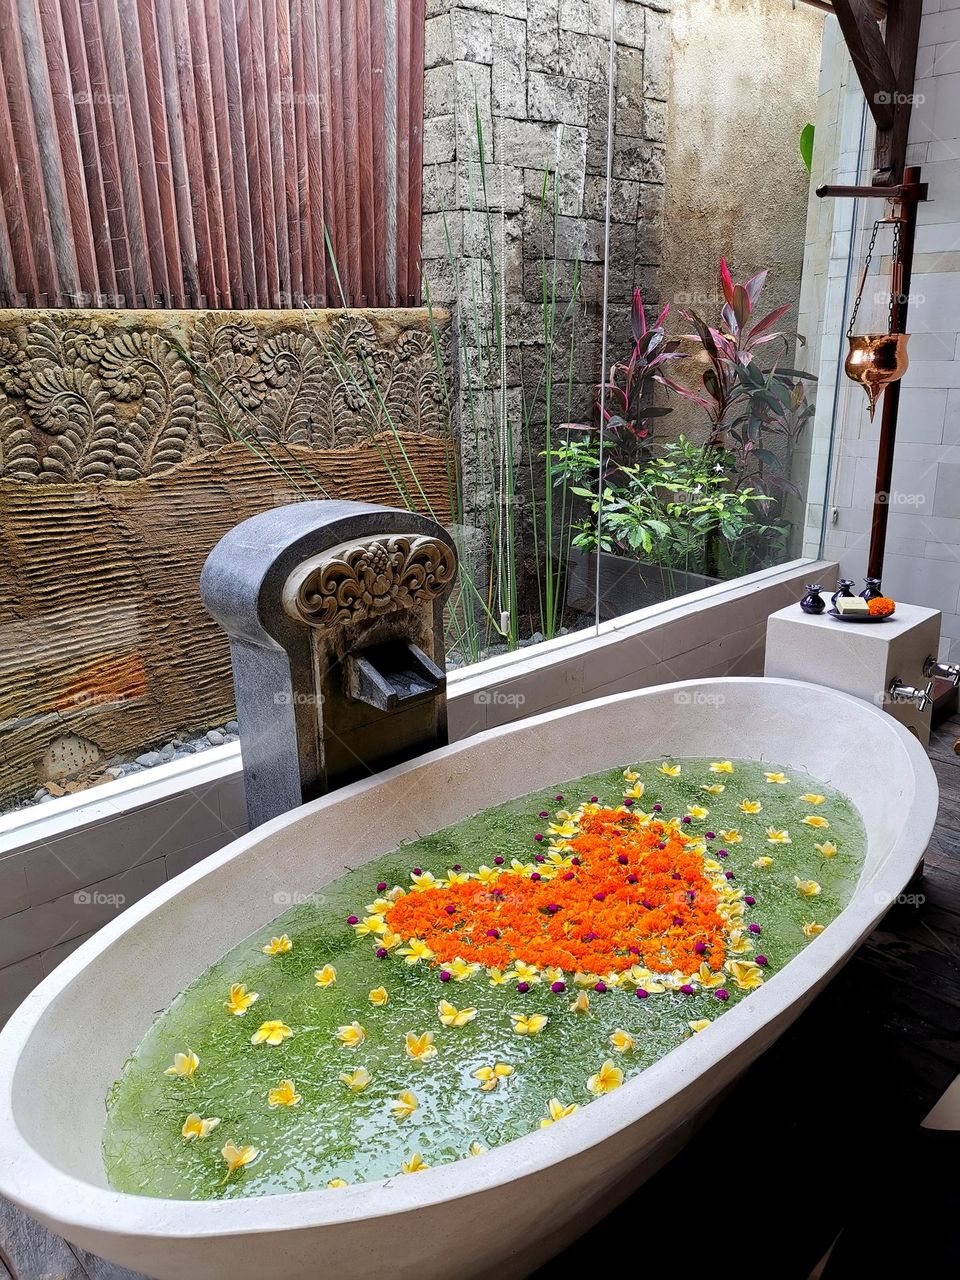 Beautiful bath with flowers. Bali experience. Relax time. Enjoy bath time.